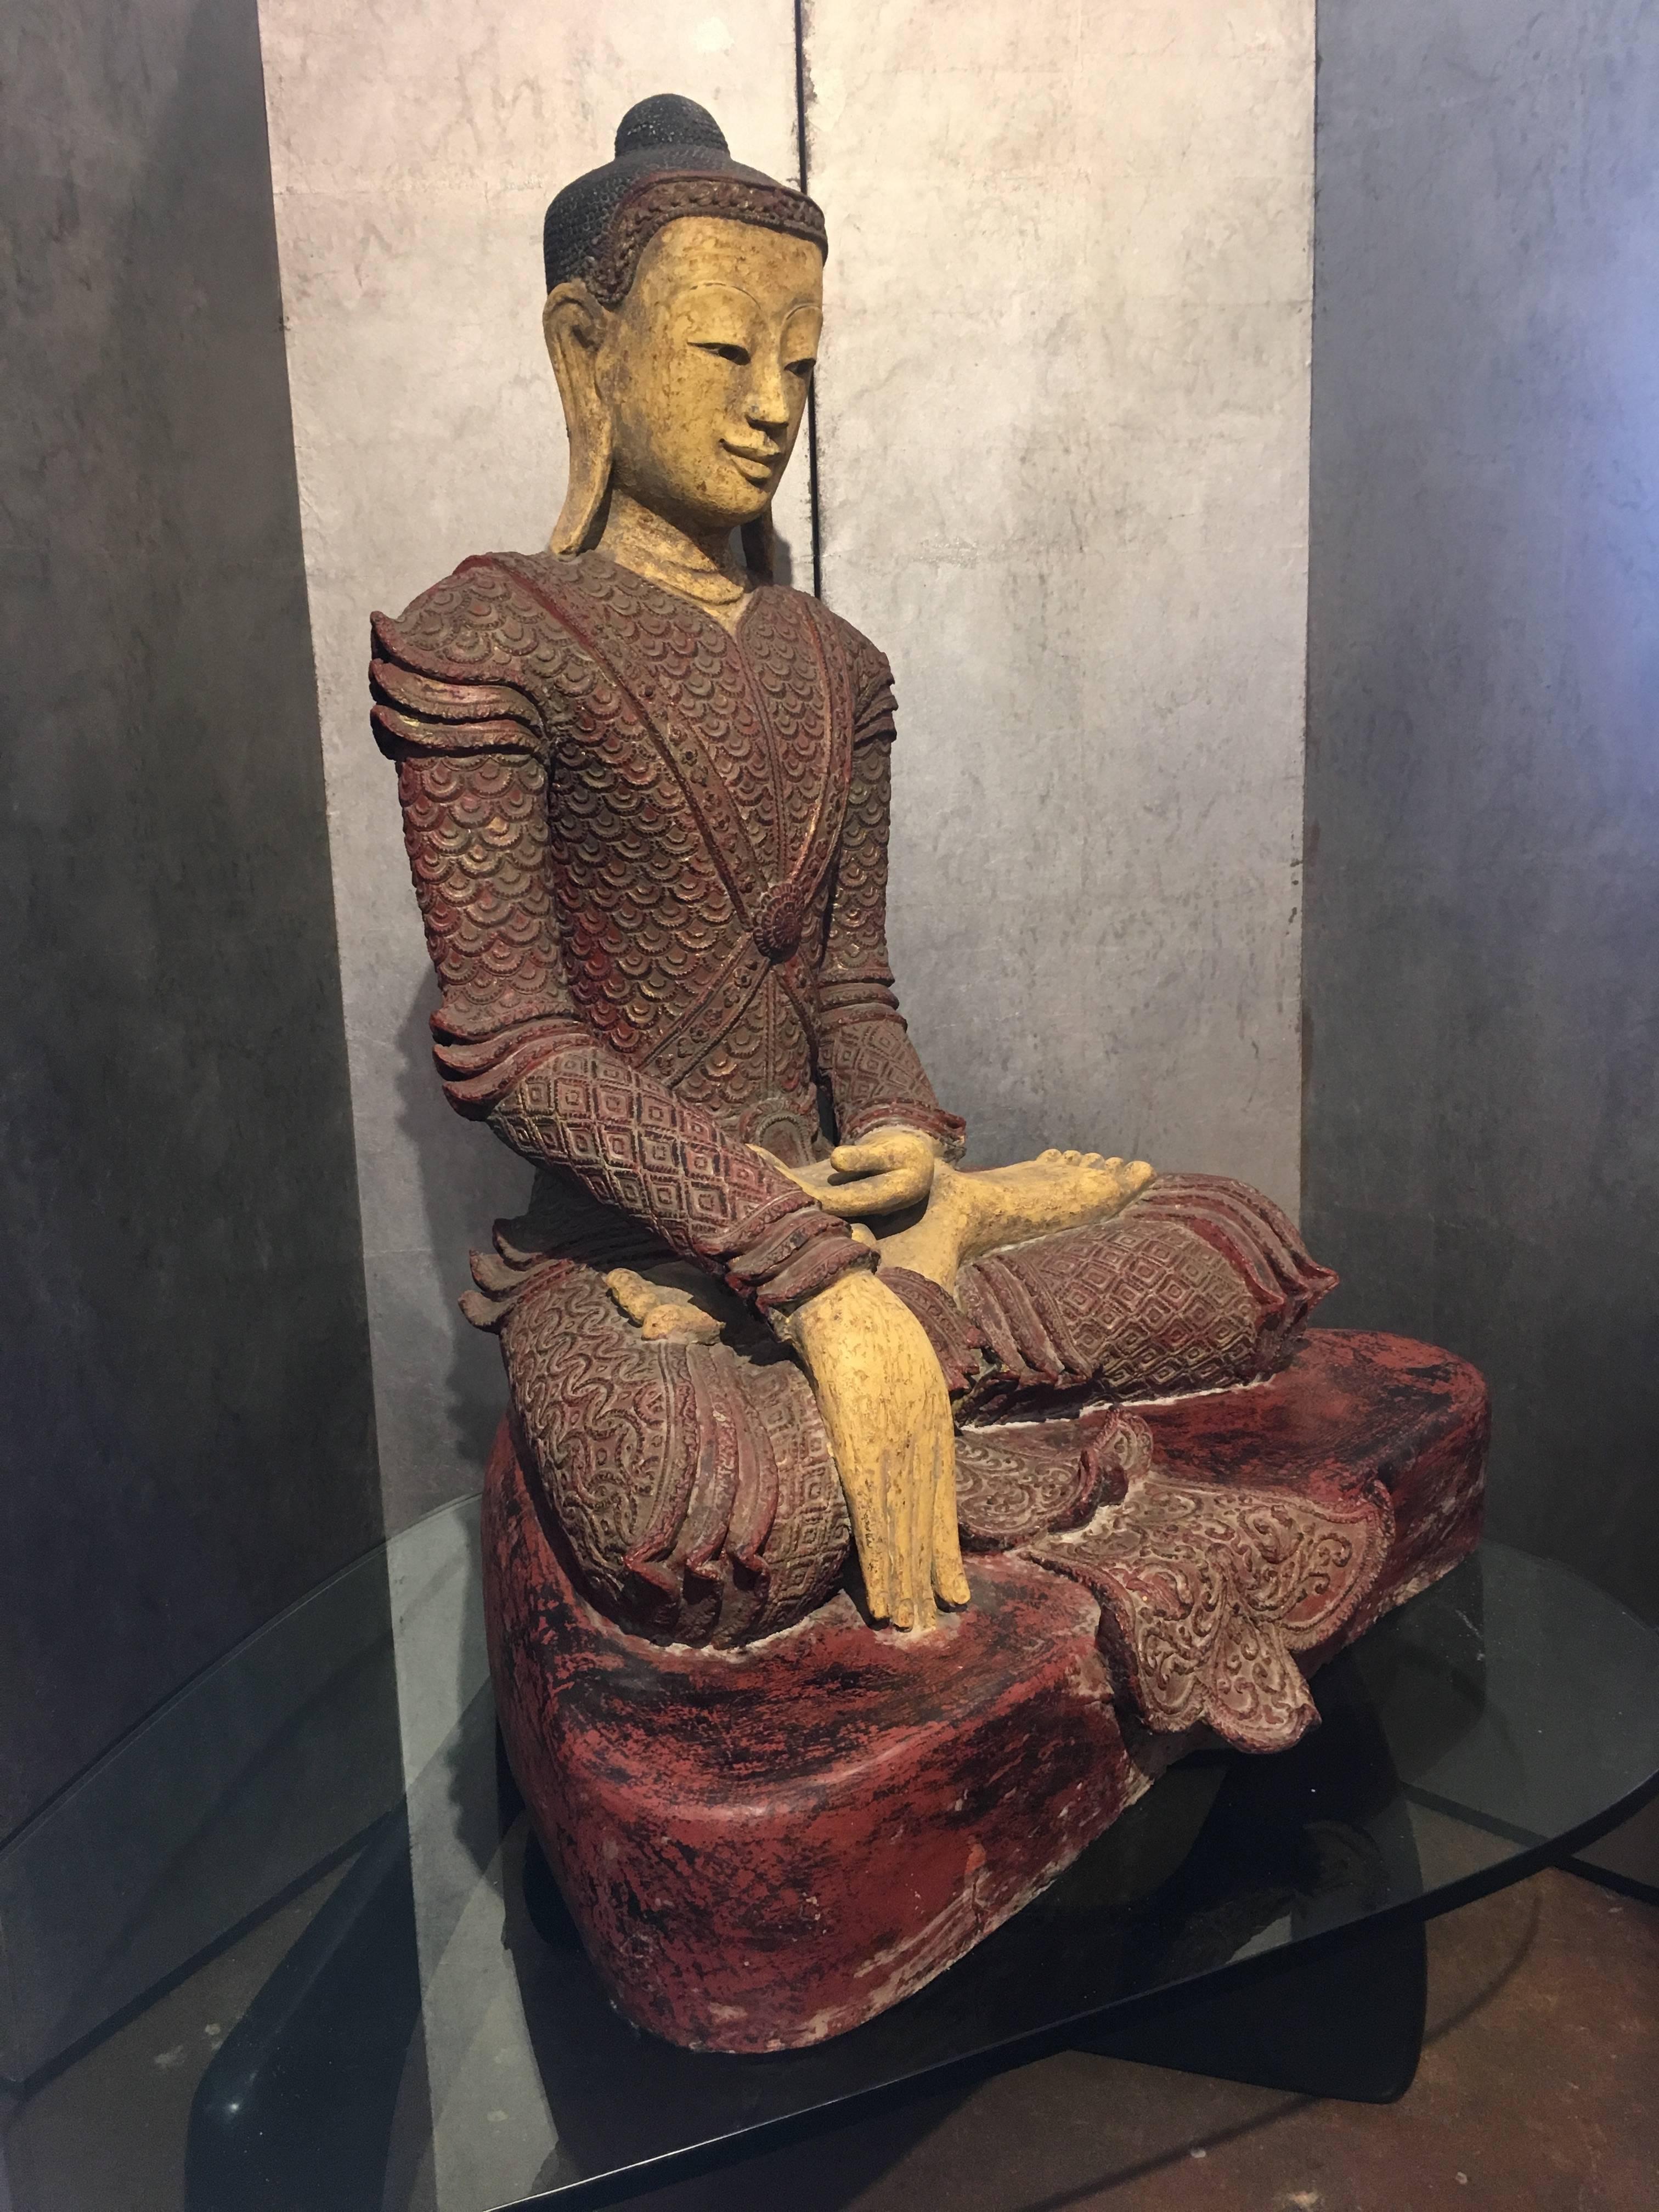 An outstanding lifesize early 20th century Shan Burmese dry lacquer figure of the Buddha dressed in royal attire.
The royal Buddha sits upon a raised platform is vajrasana, hands in bhumiprasha mudra, calling the earth to witness his enlightenment.